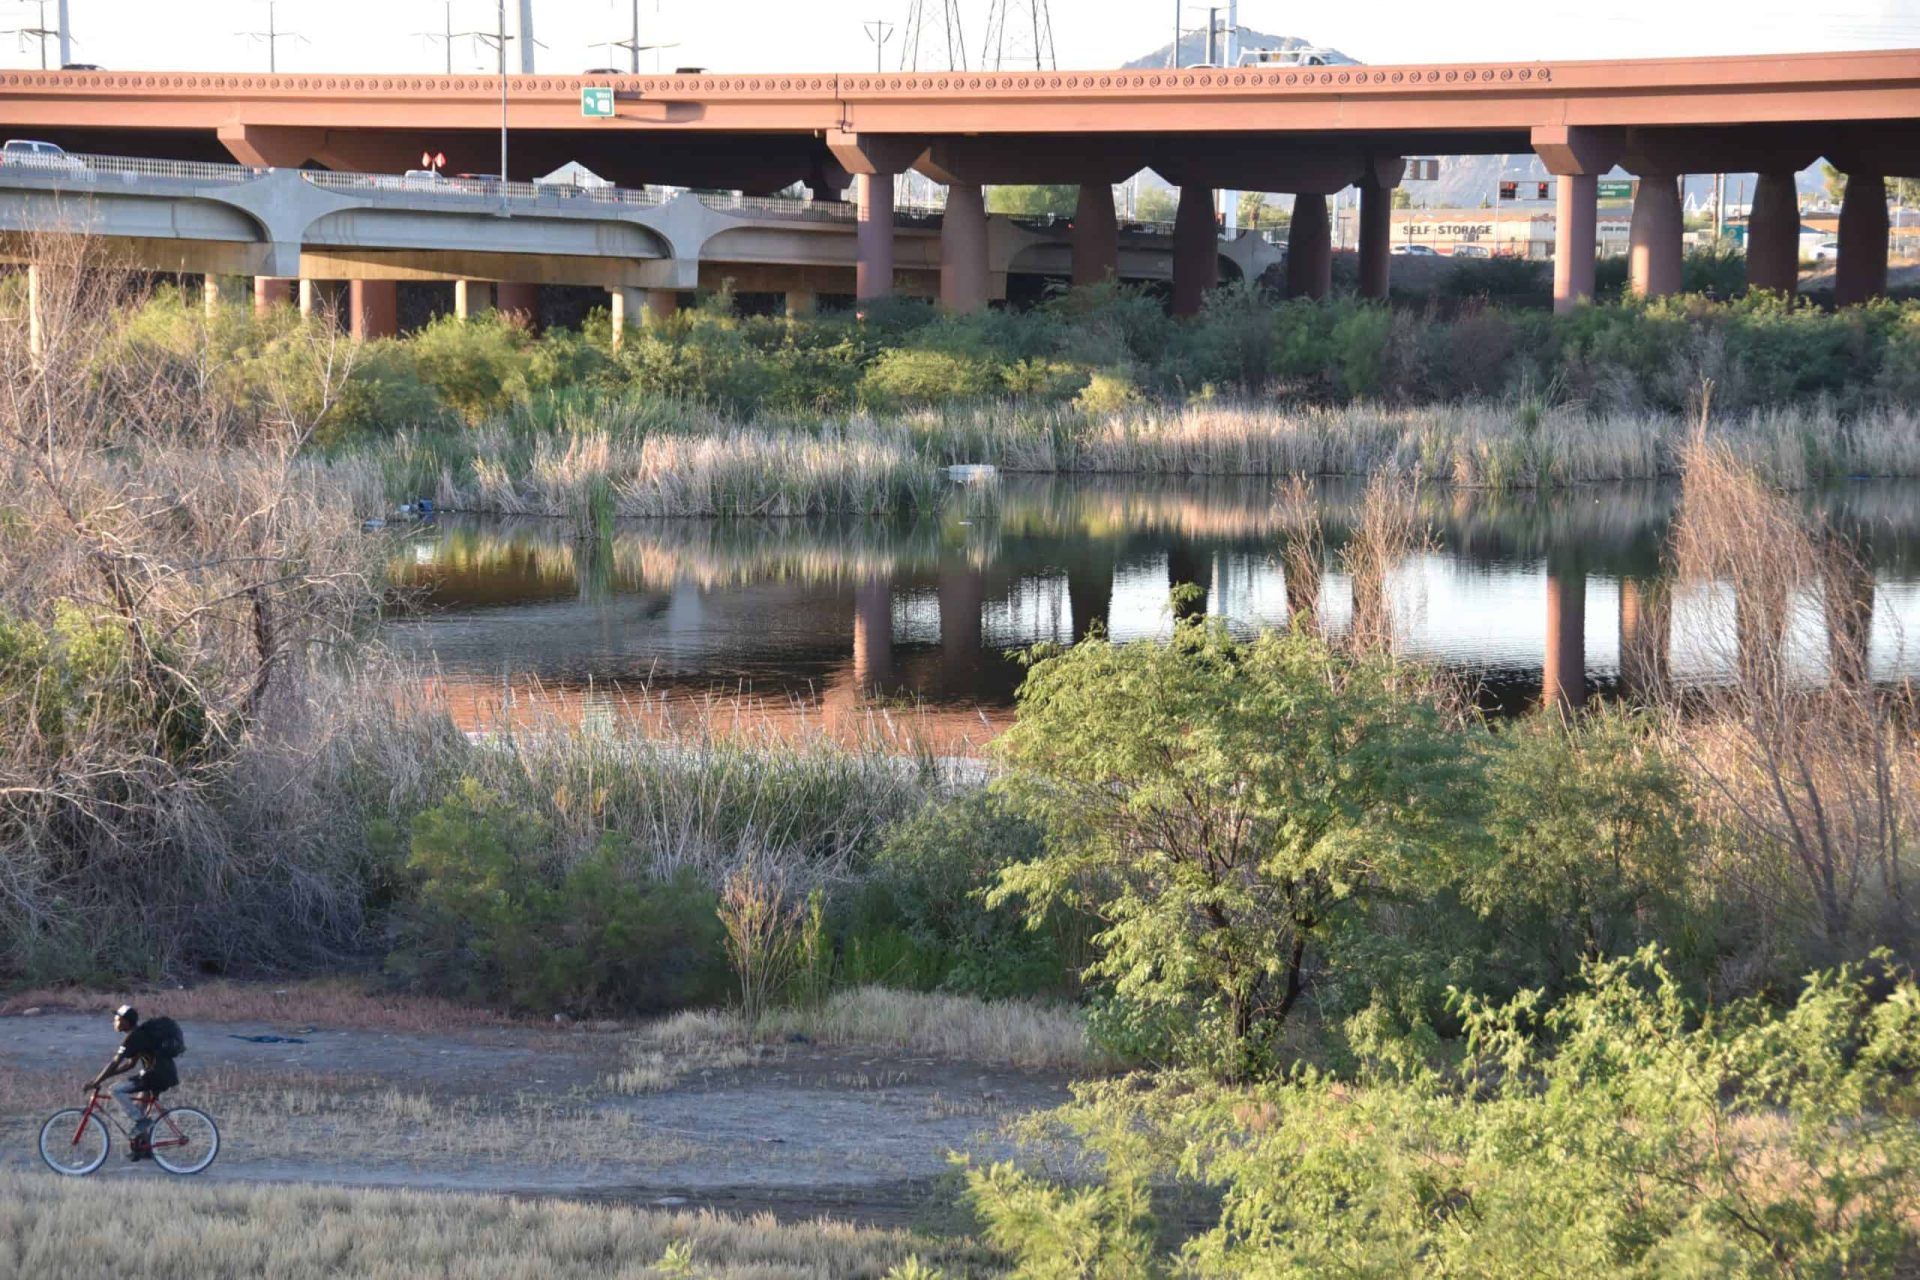 Homeless Population Along Salt River Vacated by City of Tempe